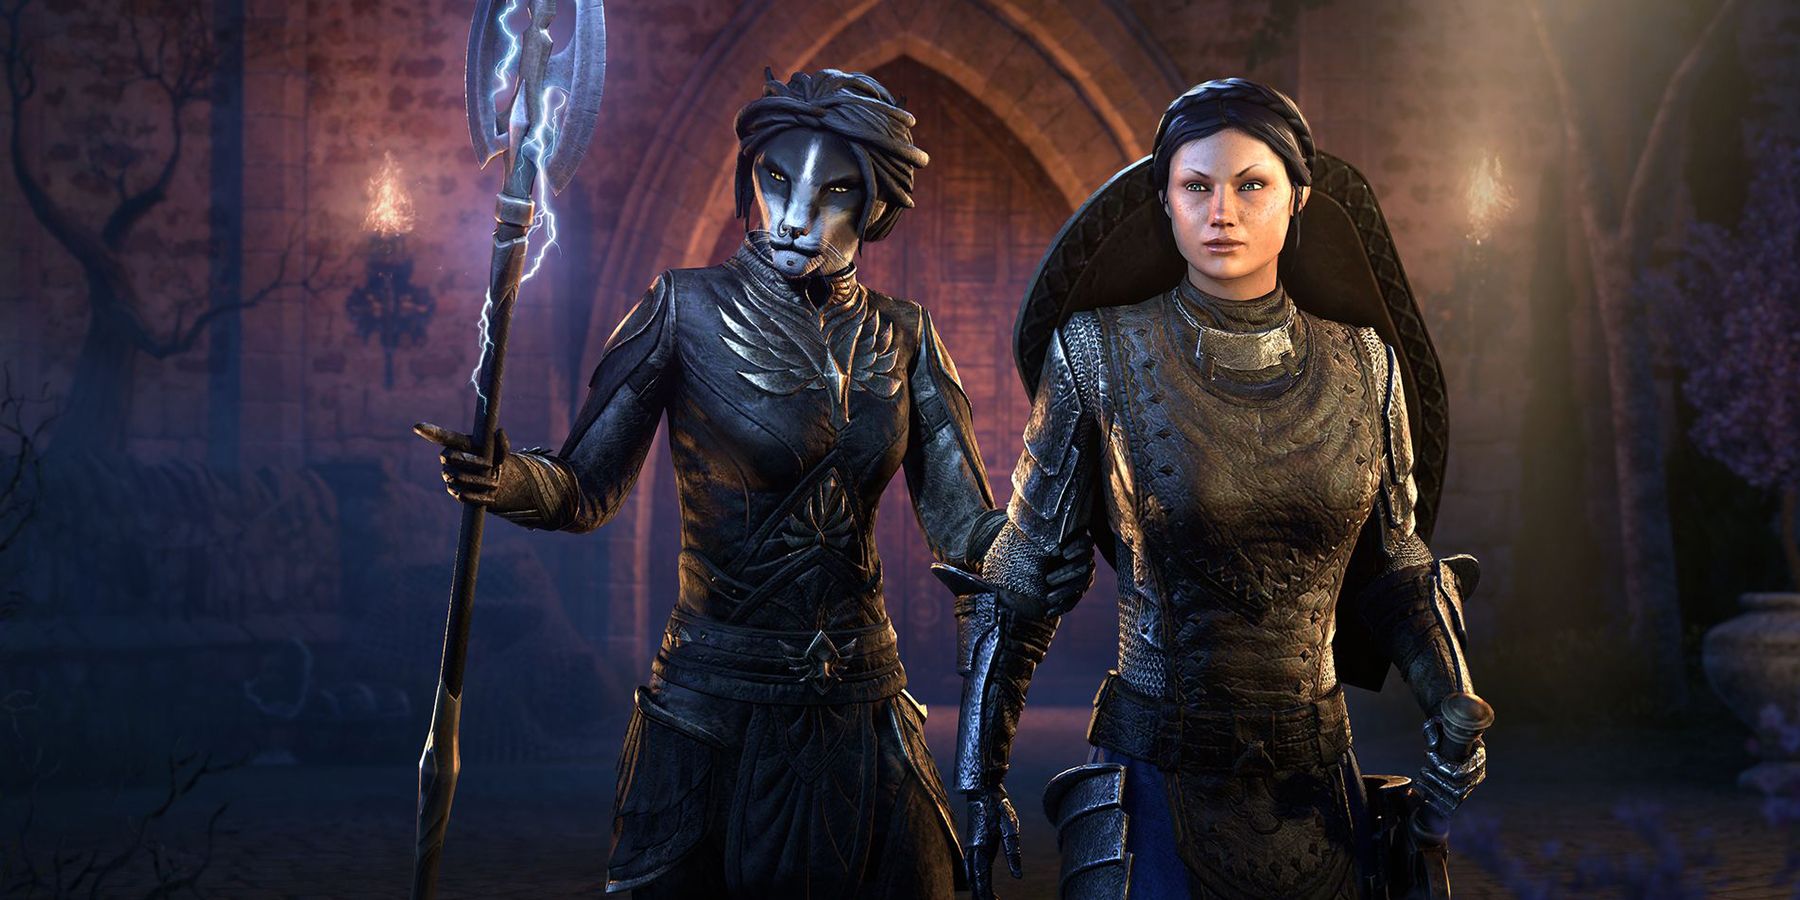 A khajiit and a human standing together in the Elder Scrolls Online